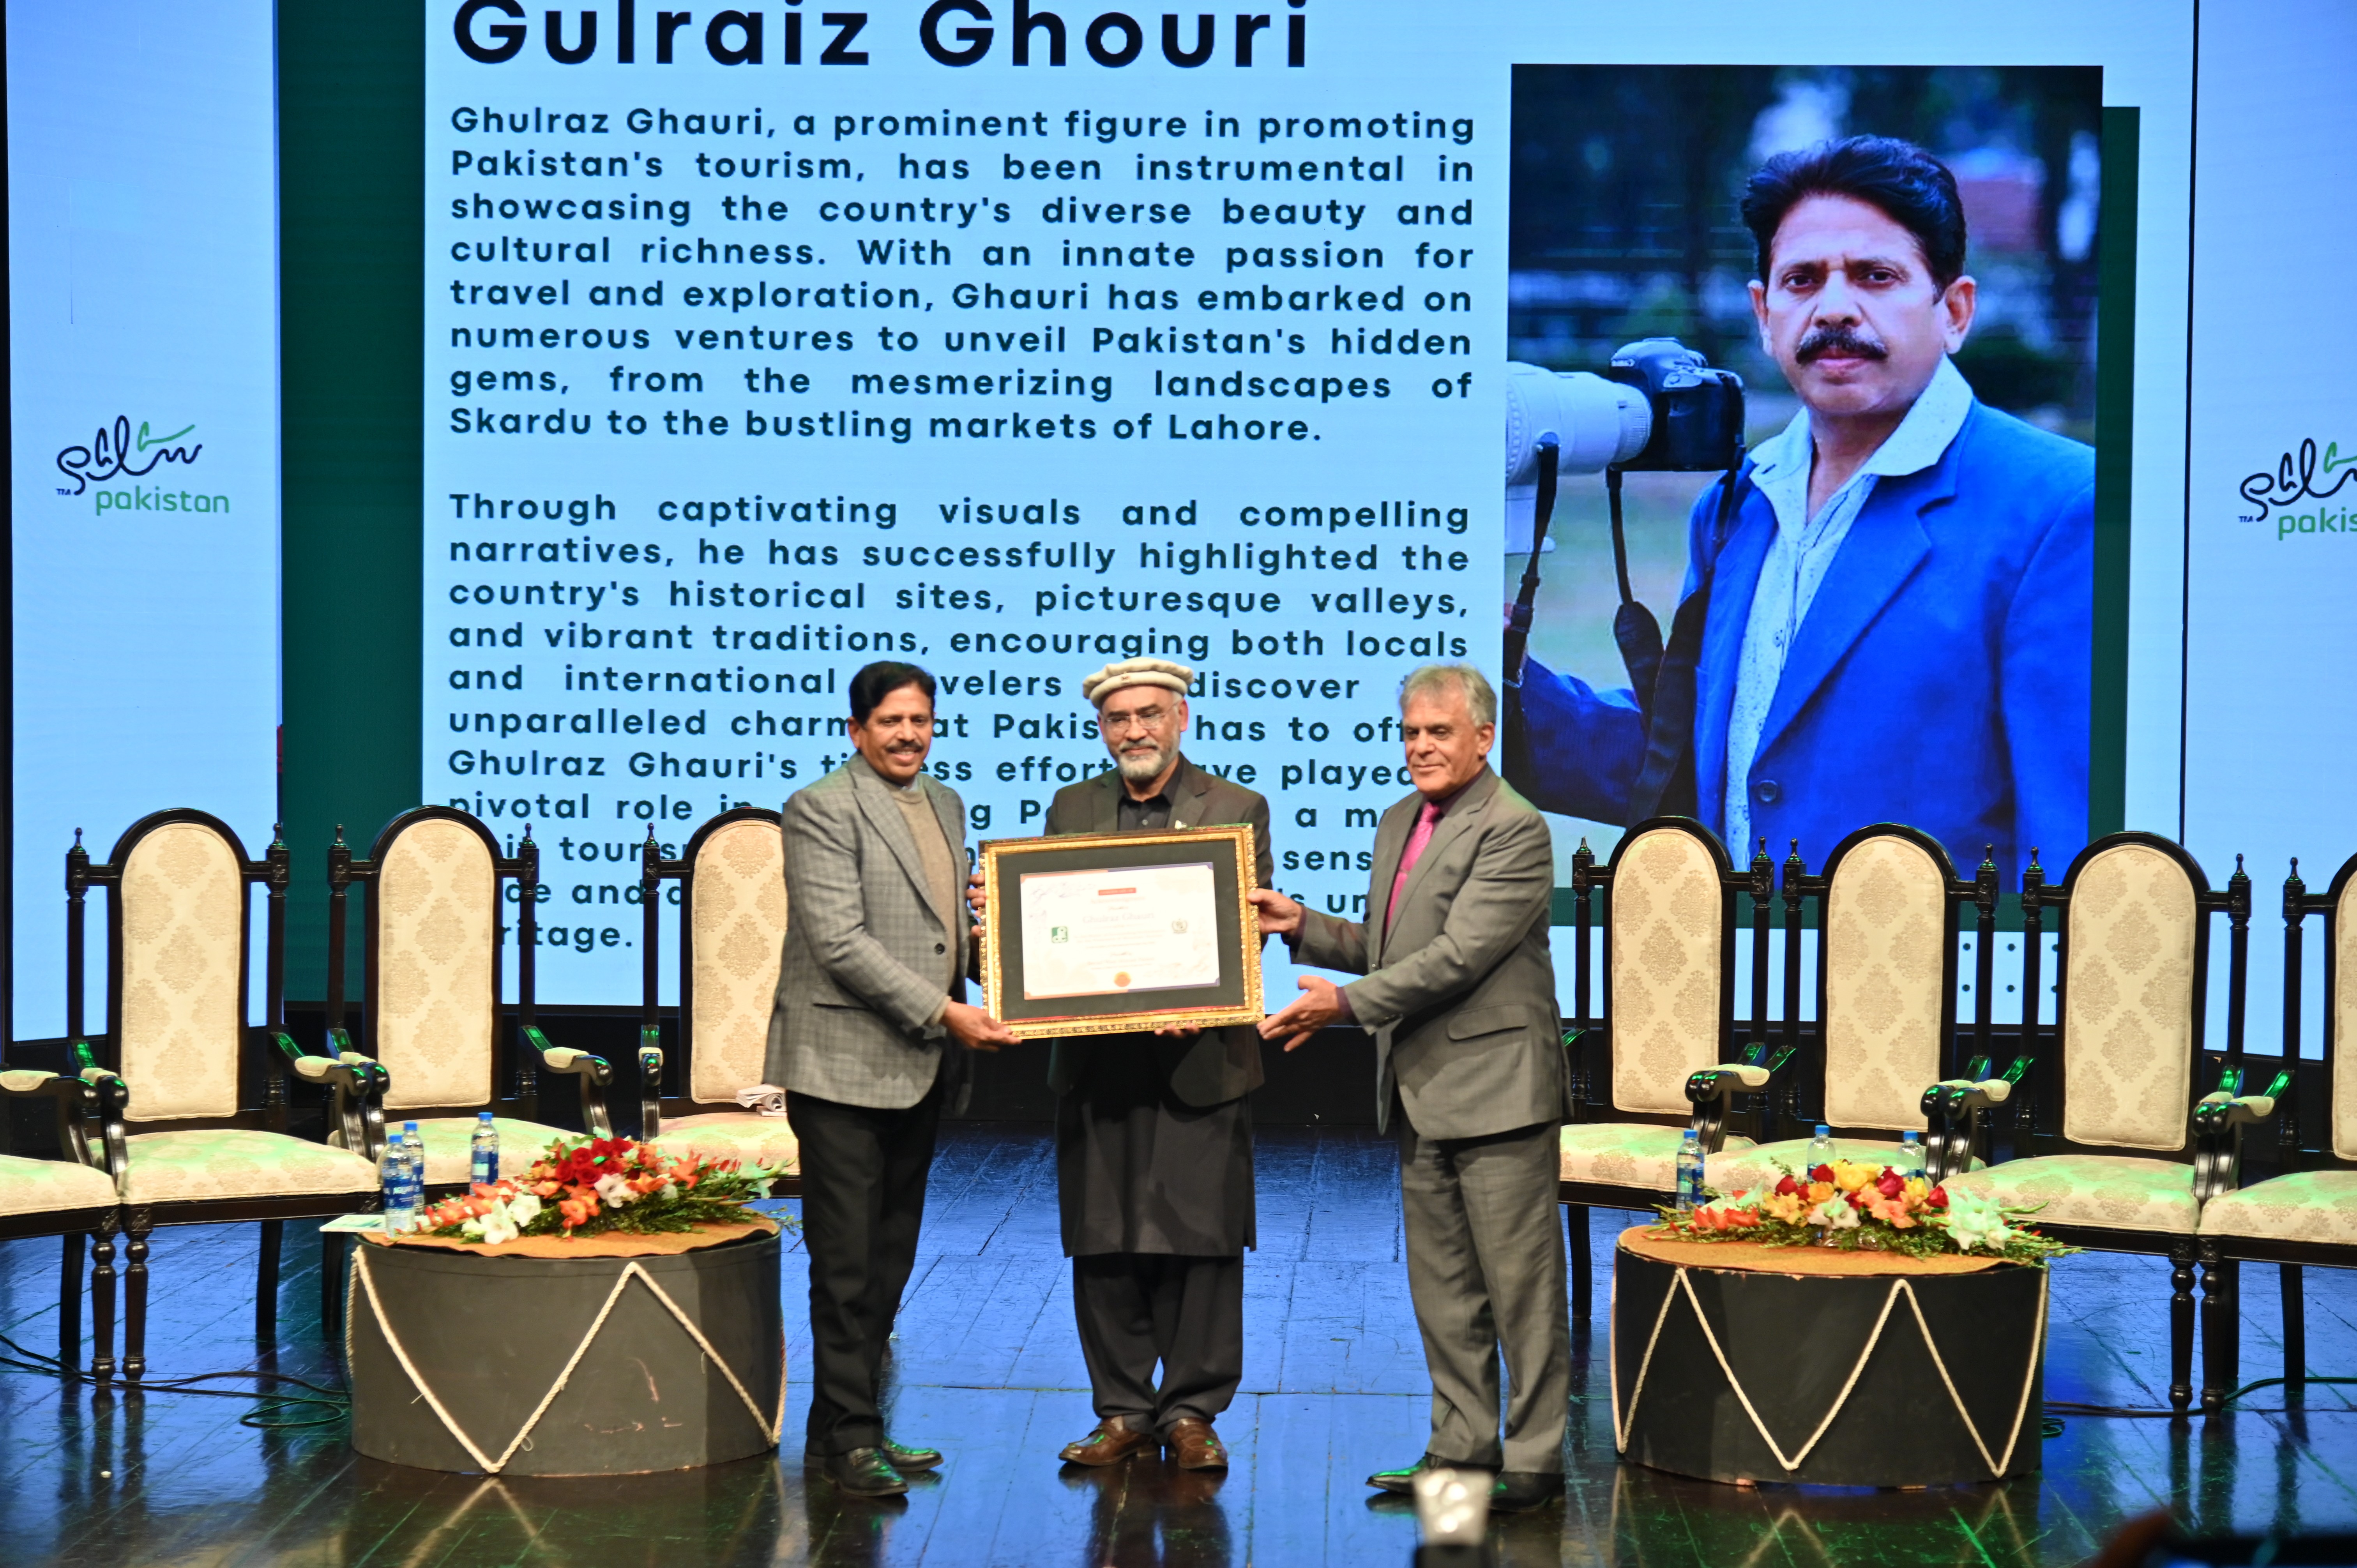 The certificate of acknowledgment presented to Gulraiz Ghouri, a Pakistani high-altitude mountaineer